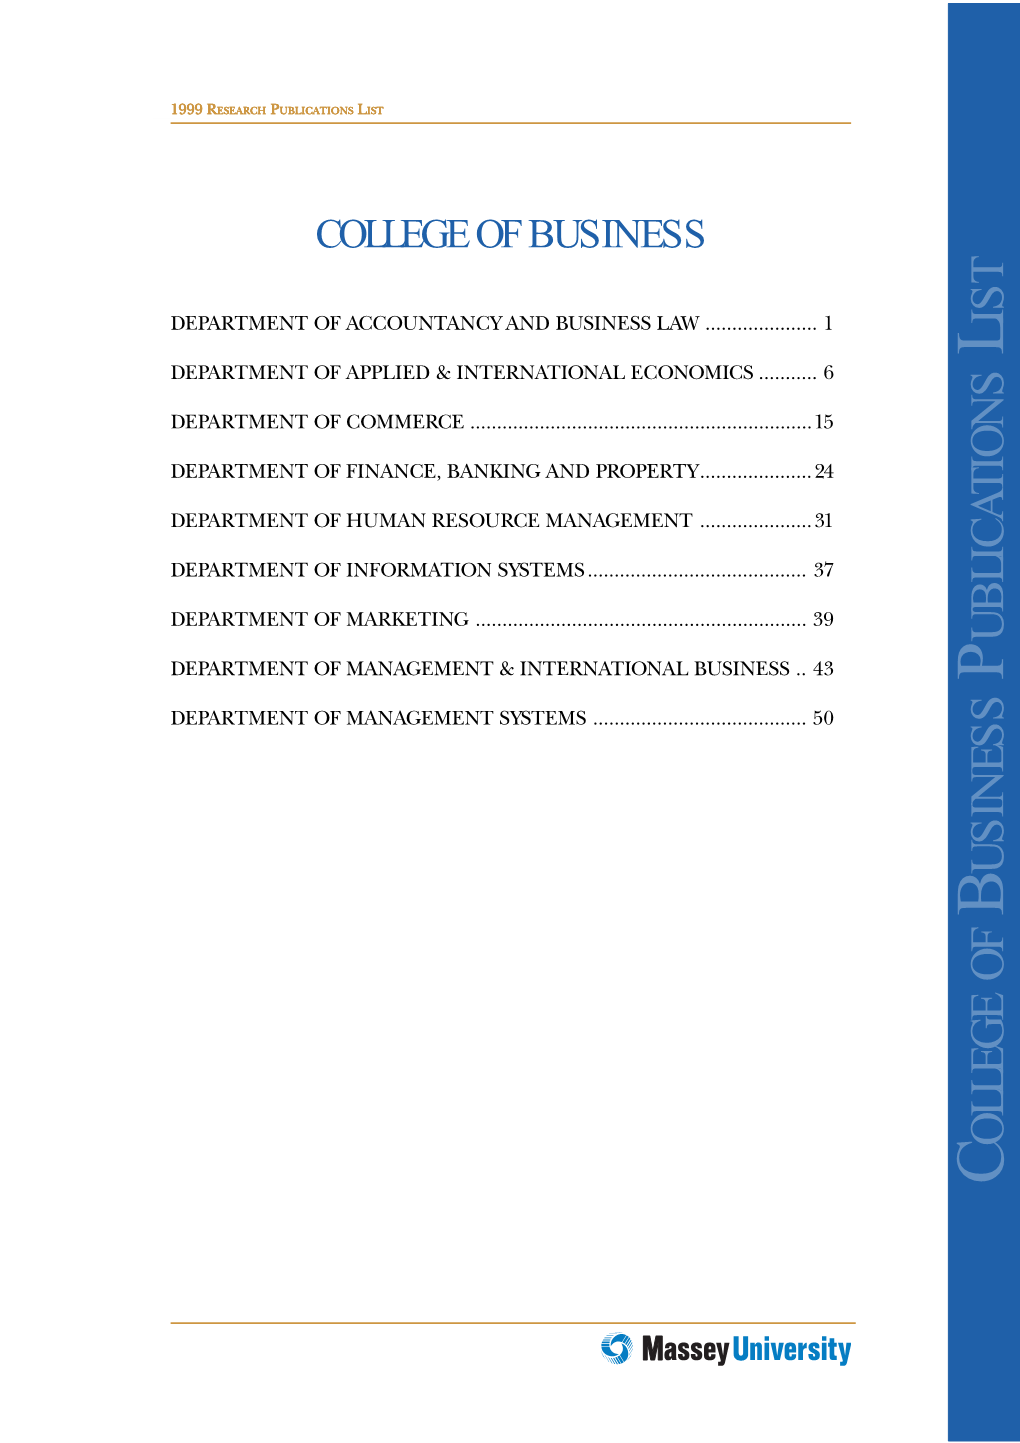 C Business Review, 5(1), 102-103